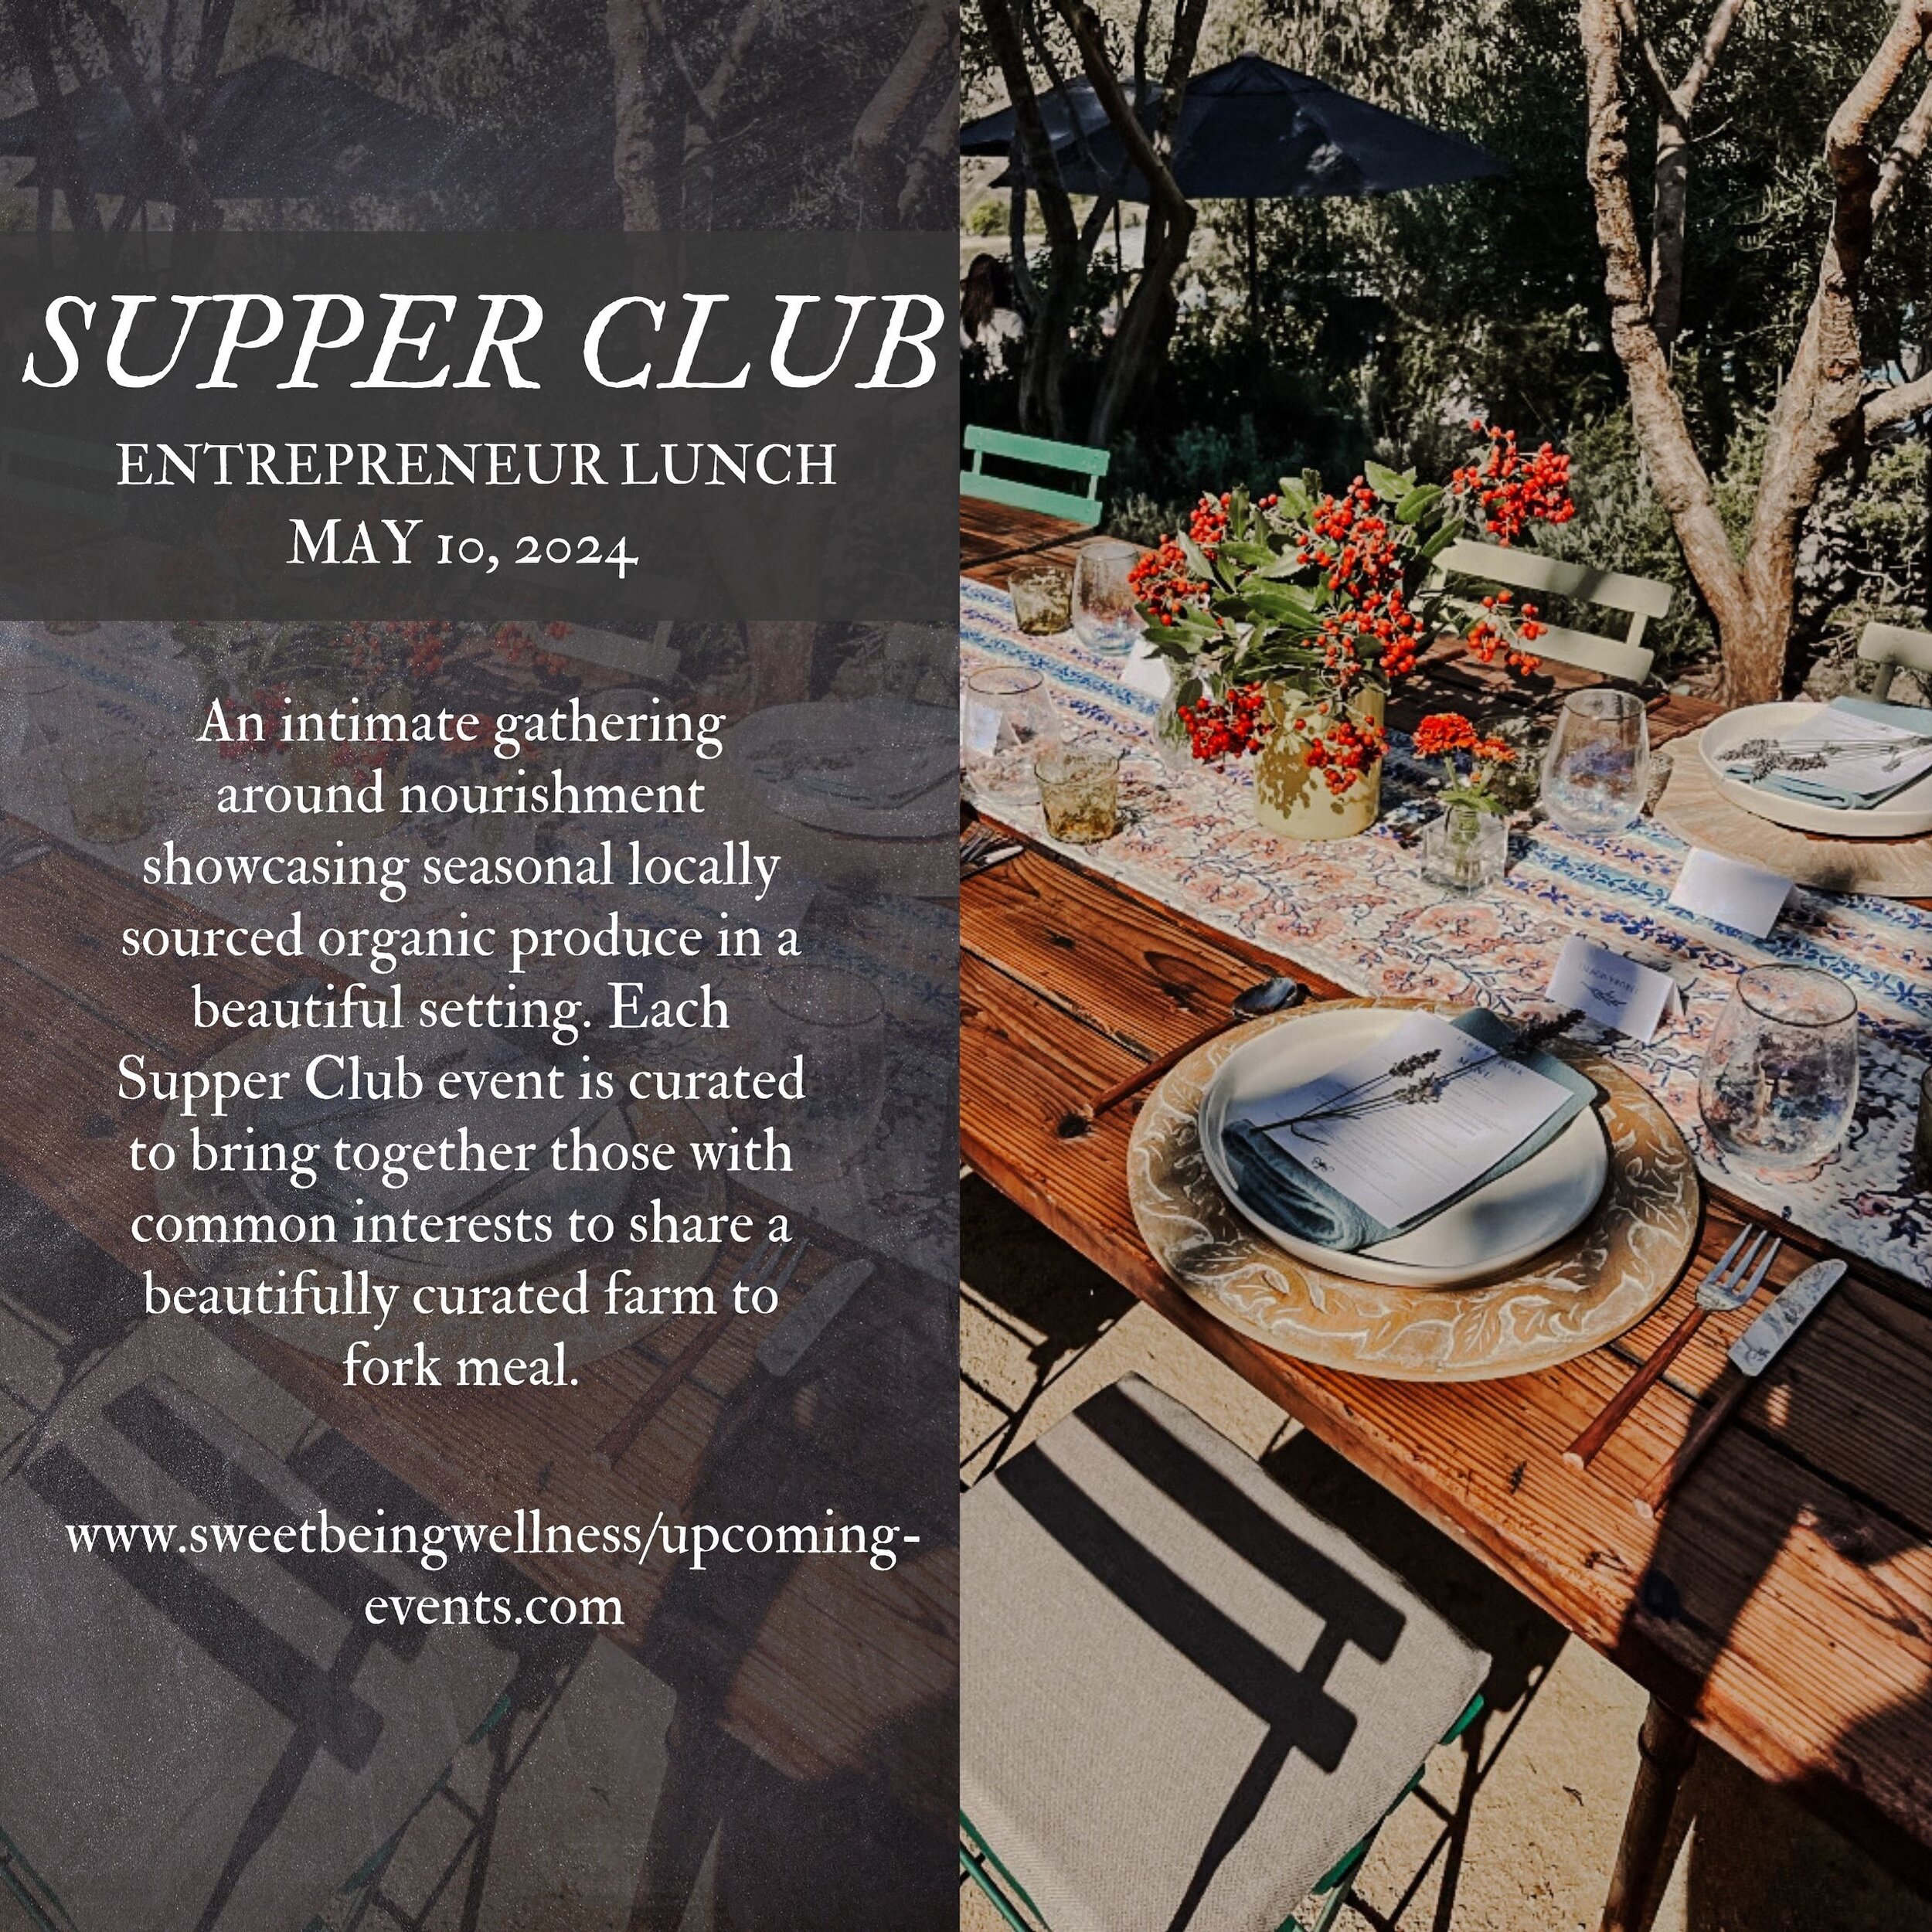 So excited to share my upcoming SUPPER CLUB event is now open for registration!
You can find the link in my bio, story or simply check my website! Looking forward to seeing all you entrepreneurs there!✨